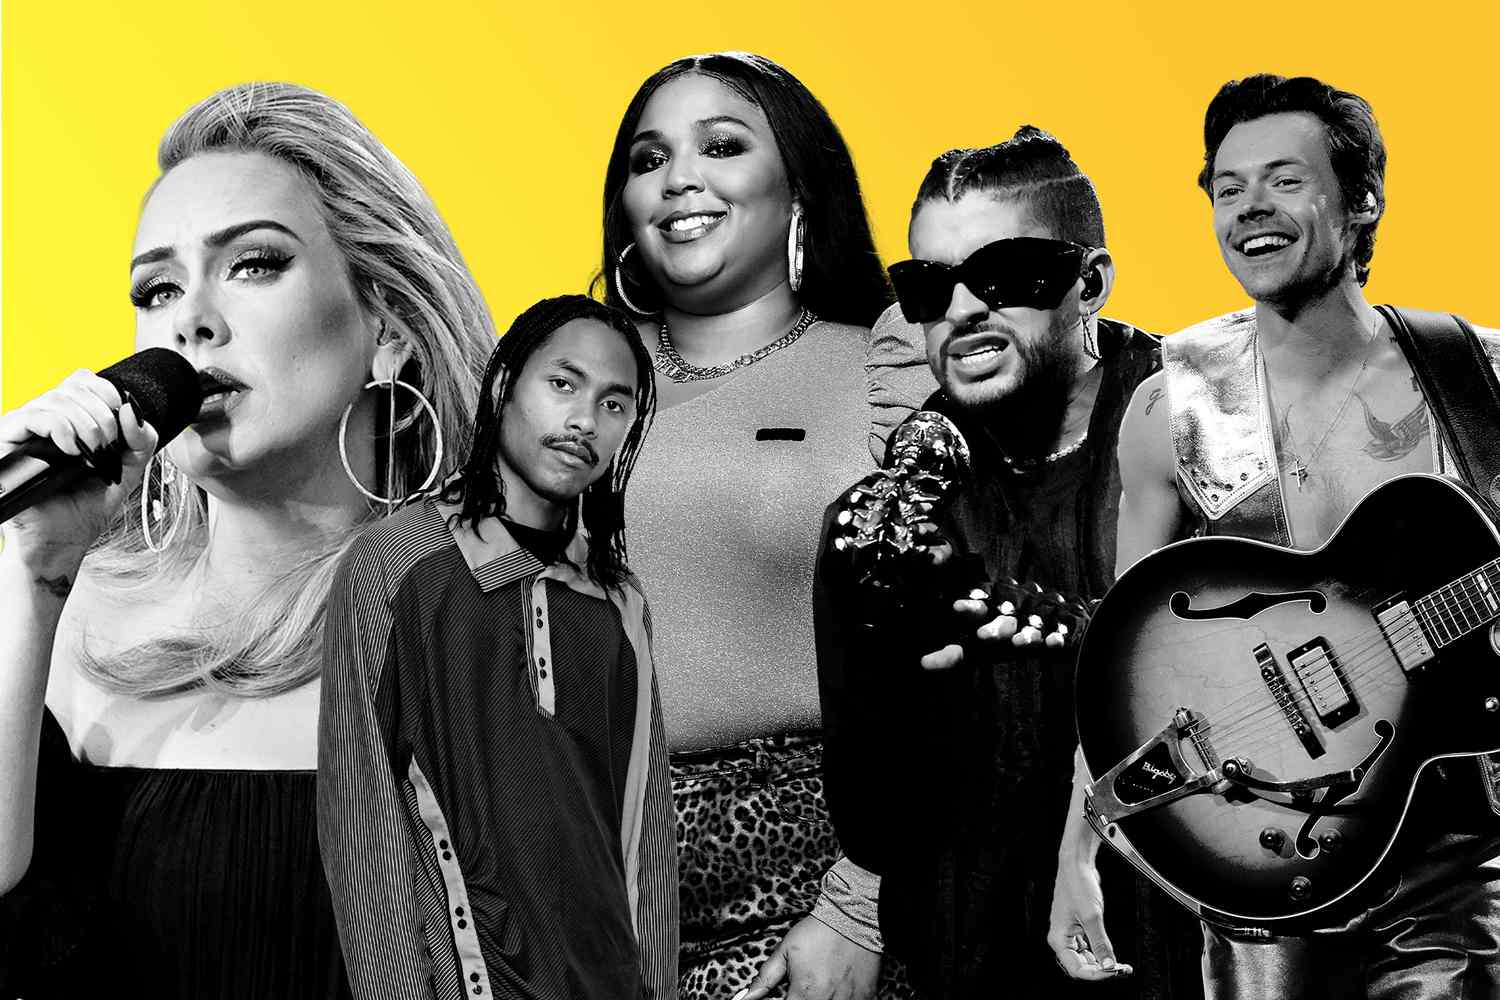 Our 2023 Grammys predictions: Who will win (and who should)